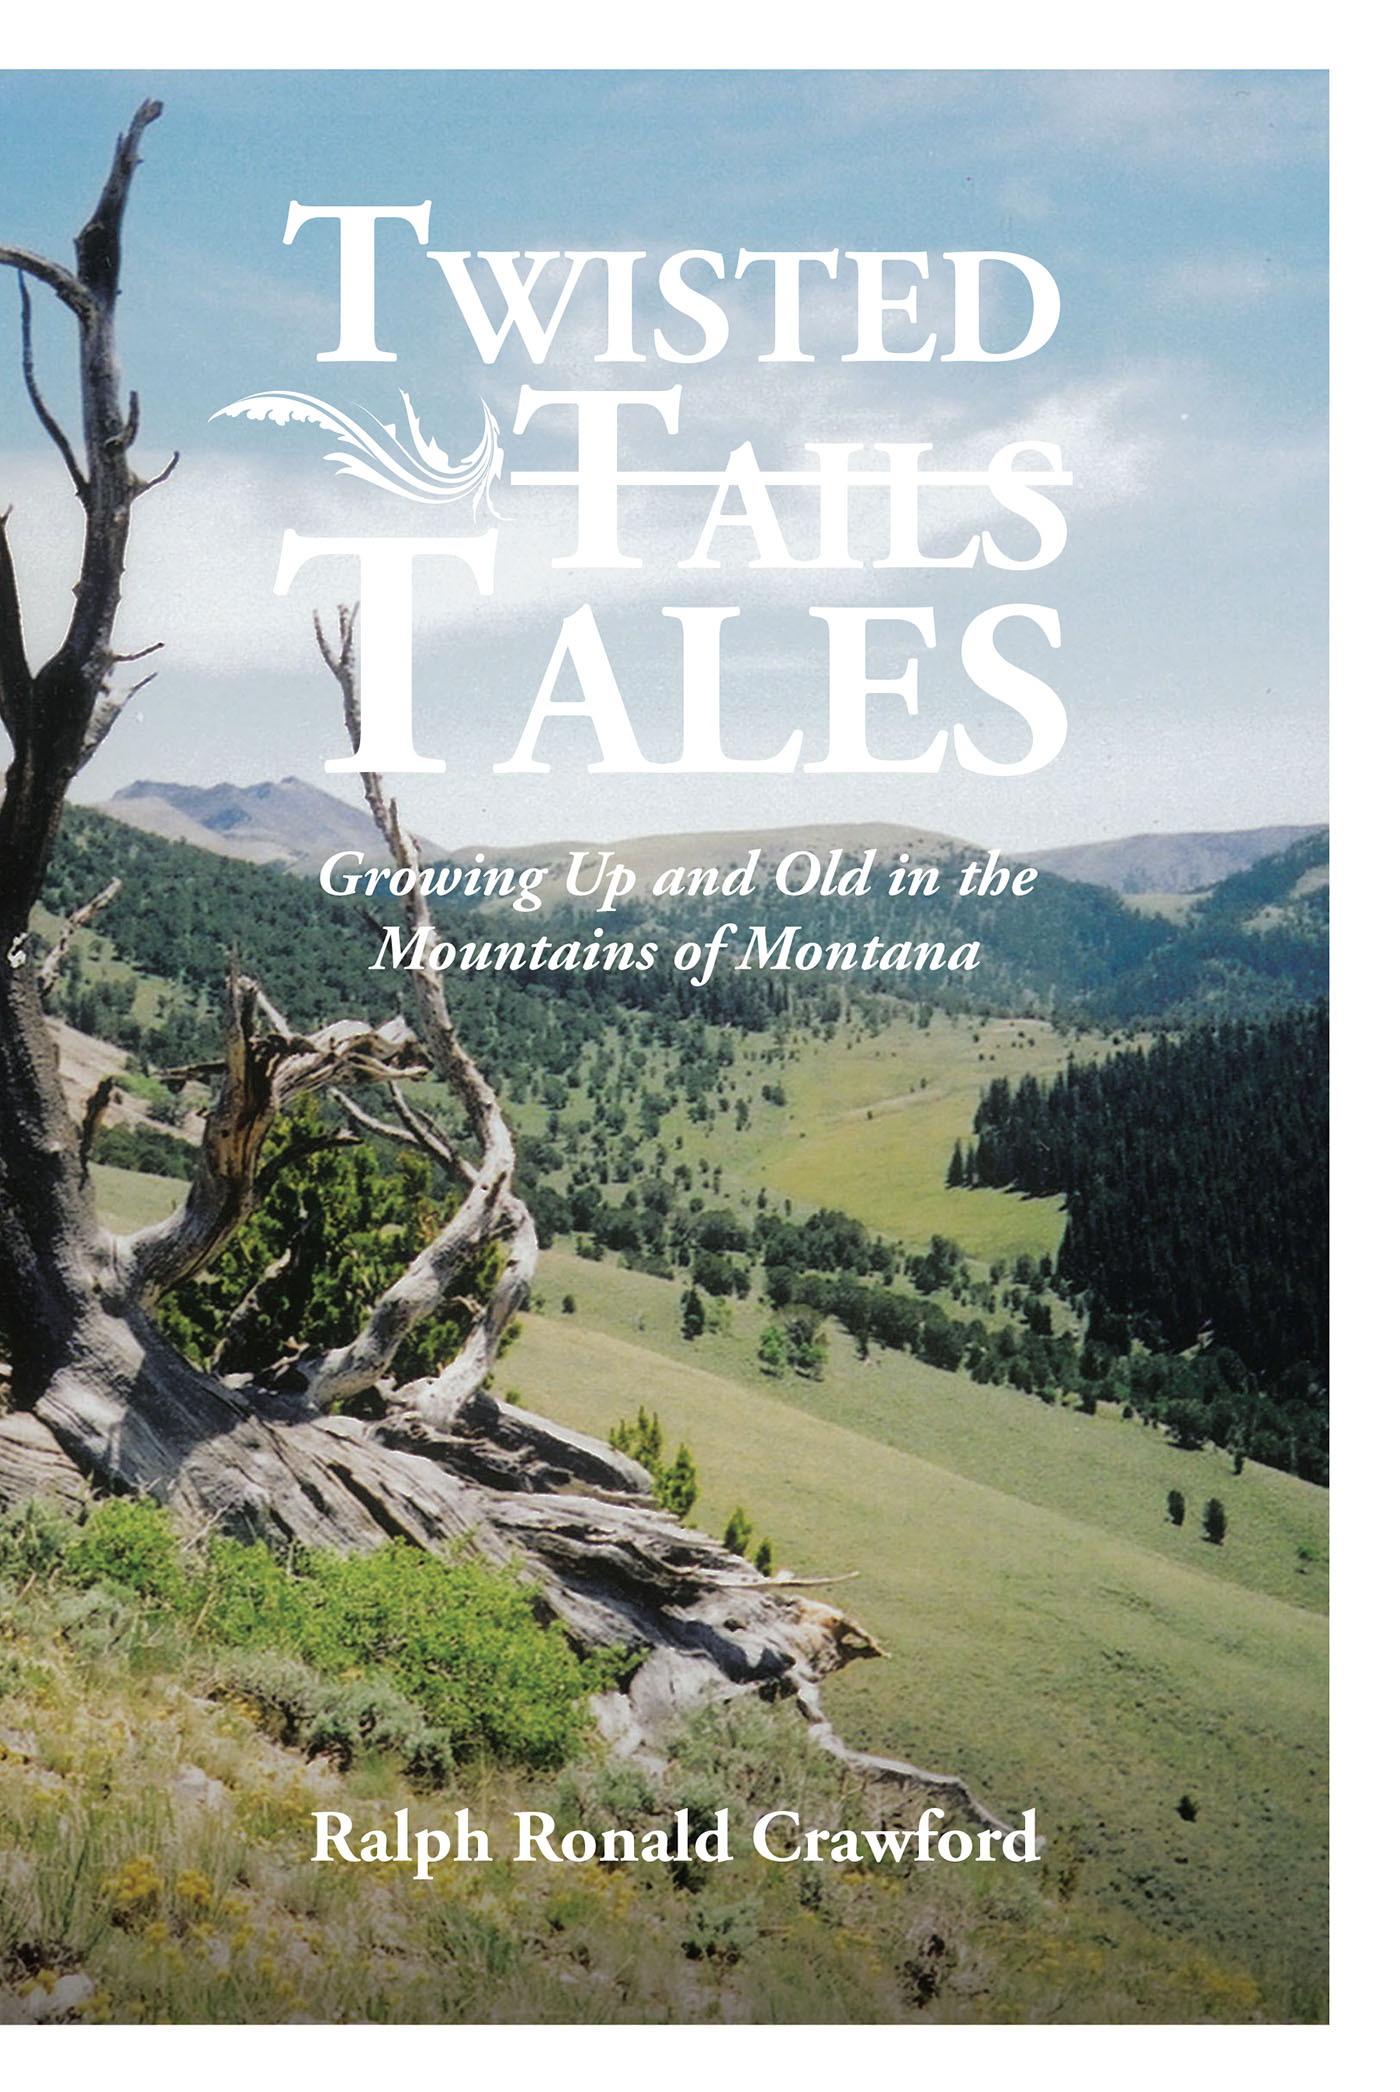 Ralph Ronald Crawford’s New Book, "Twisted Tales: Growing Up and Old in the Mountains of Montana," is a Witty Collection of Stories from the Author’s Outdoorsy Upbringing